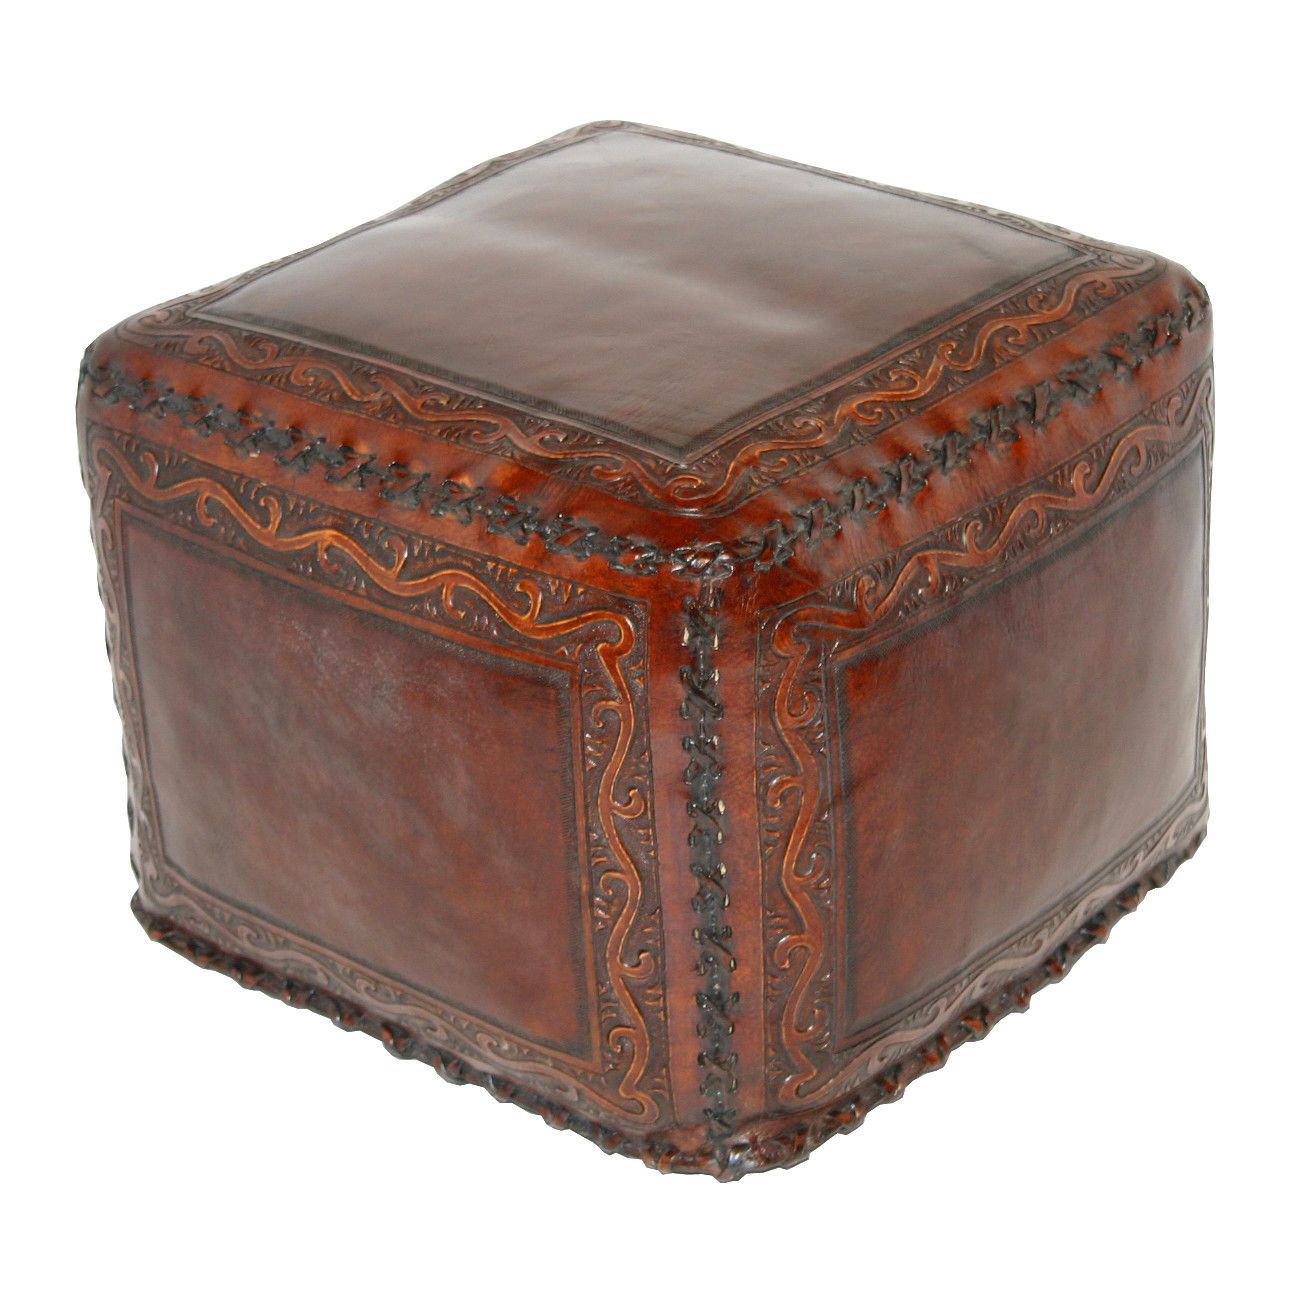 New World Trading Classic Stitch Leather Ottoman | Leather Pouf With Weathered Ivory Leather Hide Pouf Ottomans (View 12 of 20)